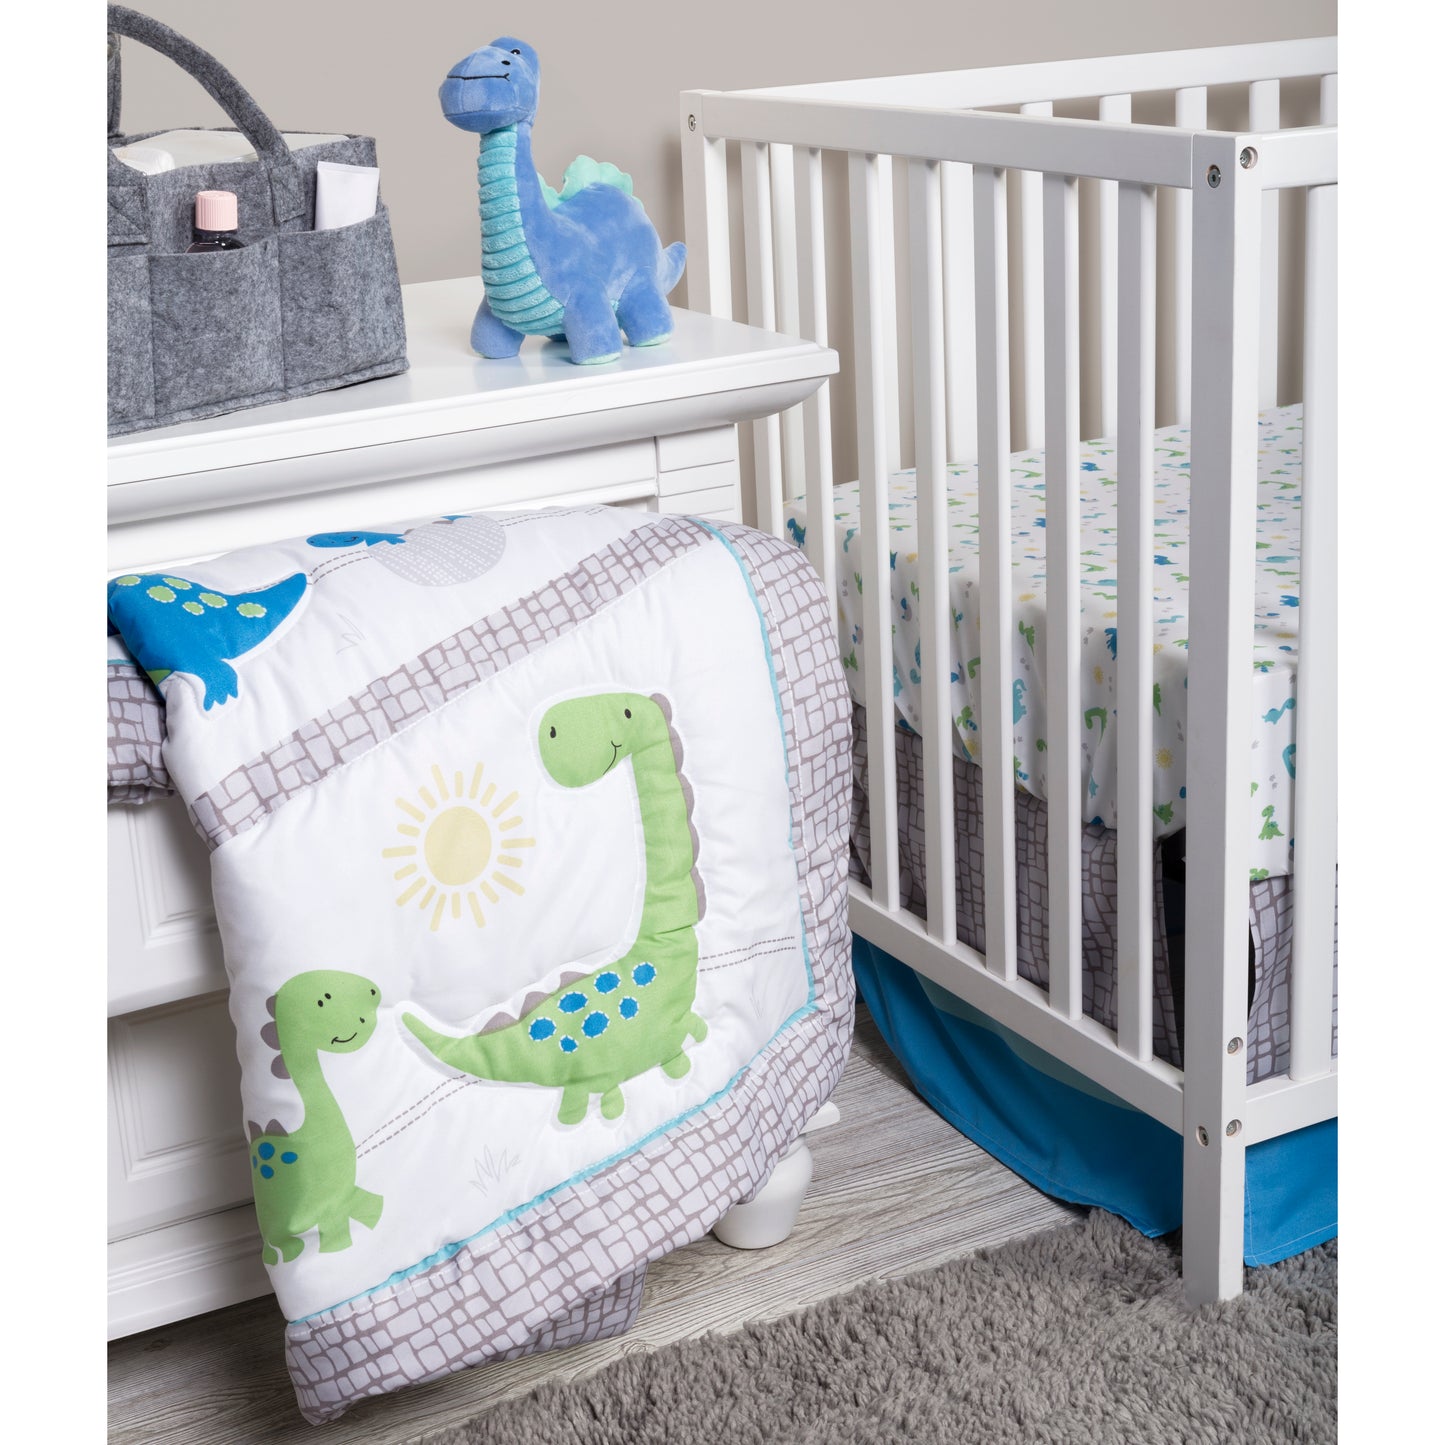  Sammy and Lou Dinosaur Pals 4 Piece Crib Bedding in stylized room